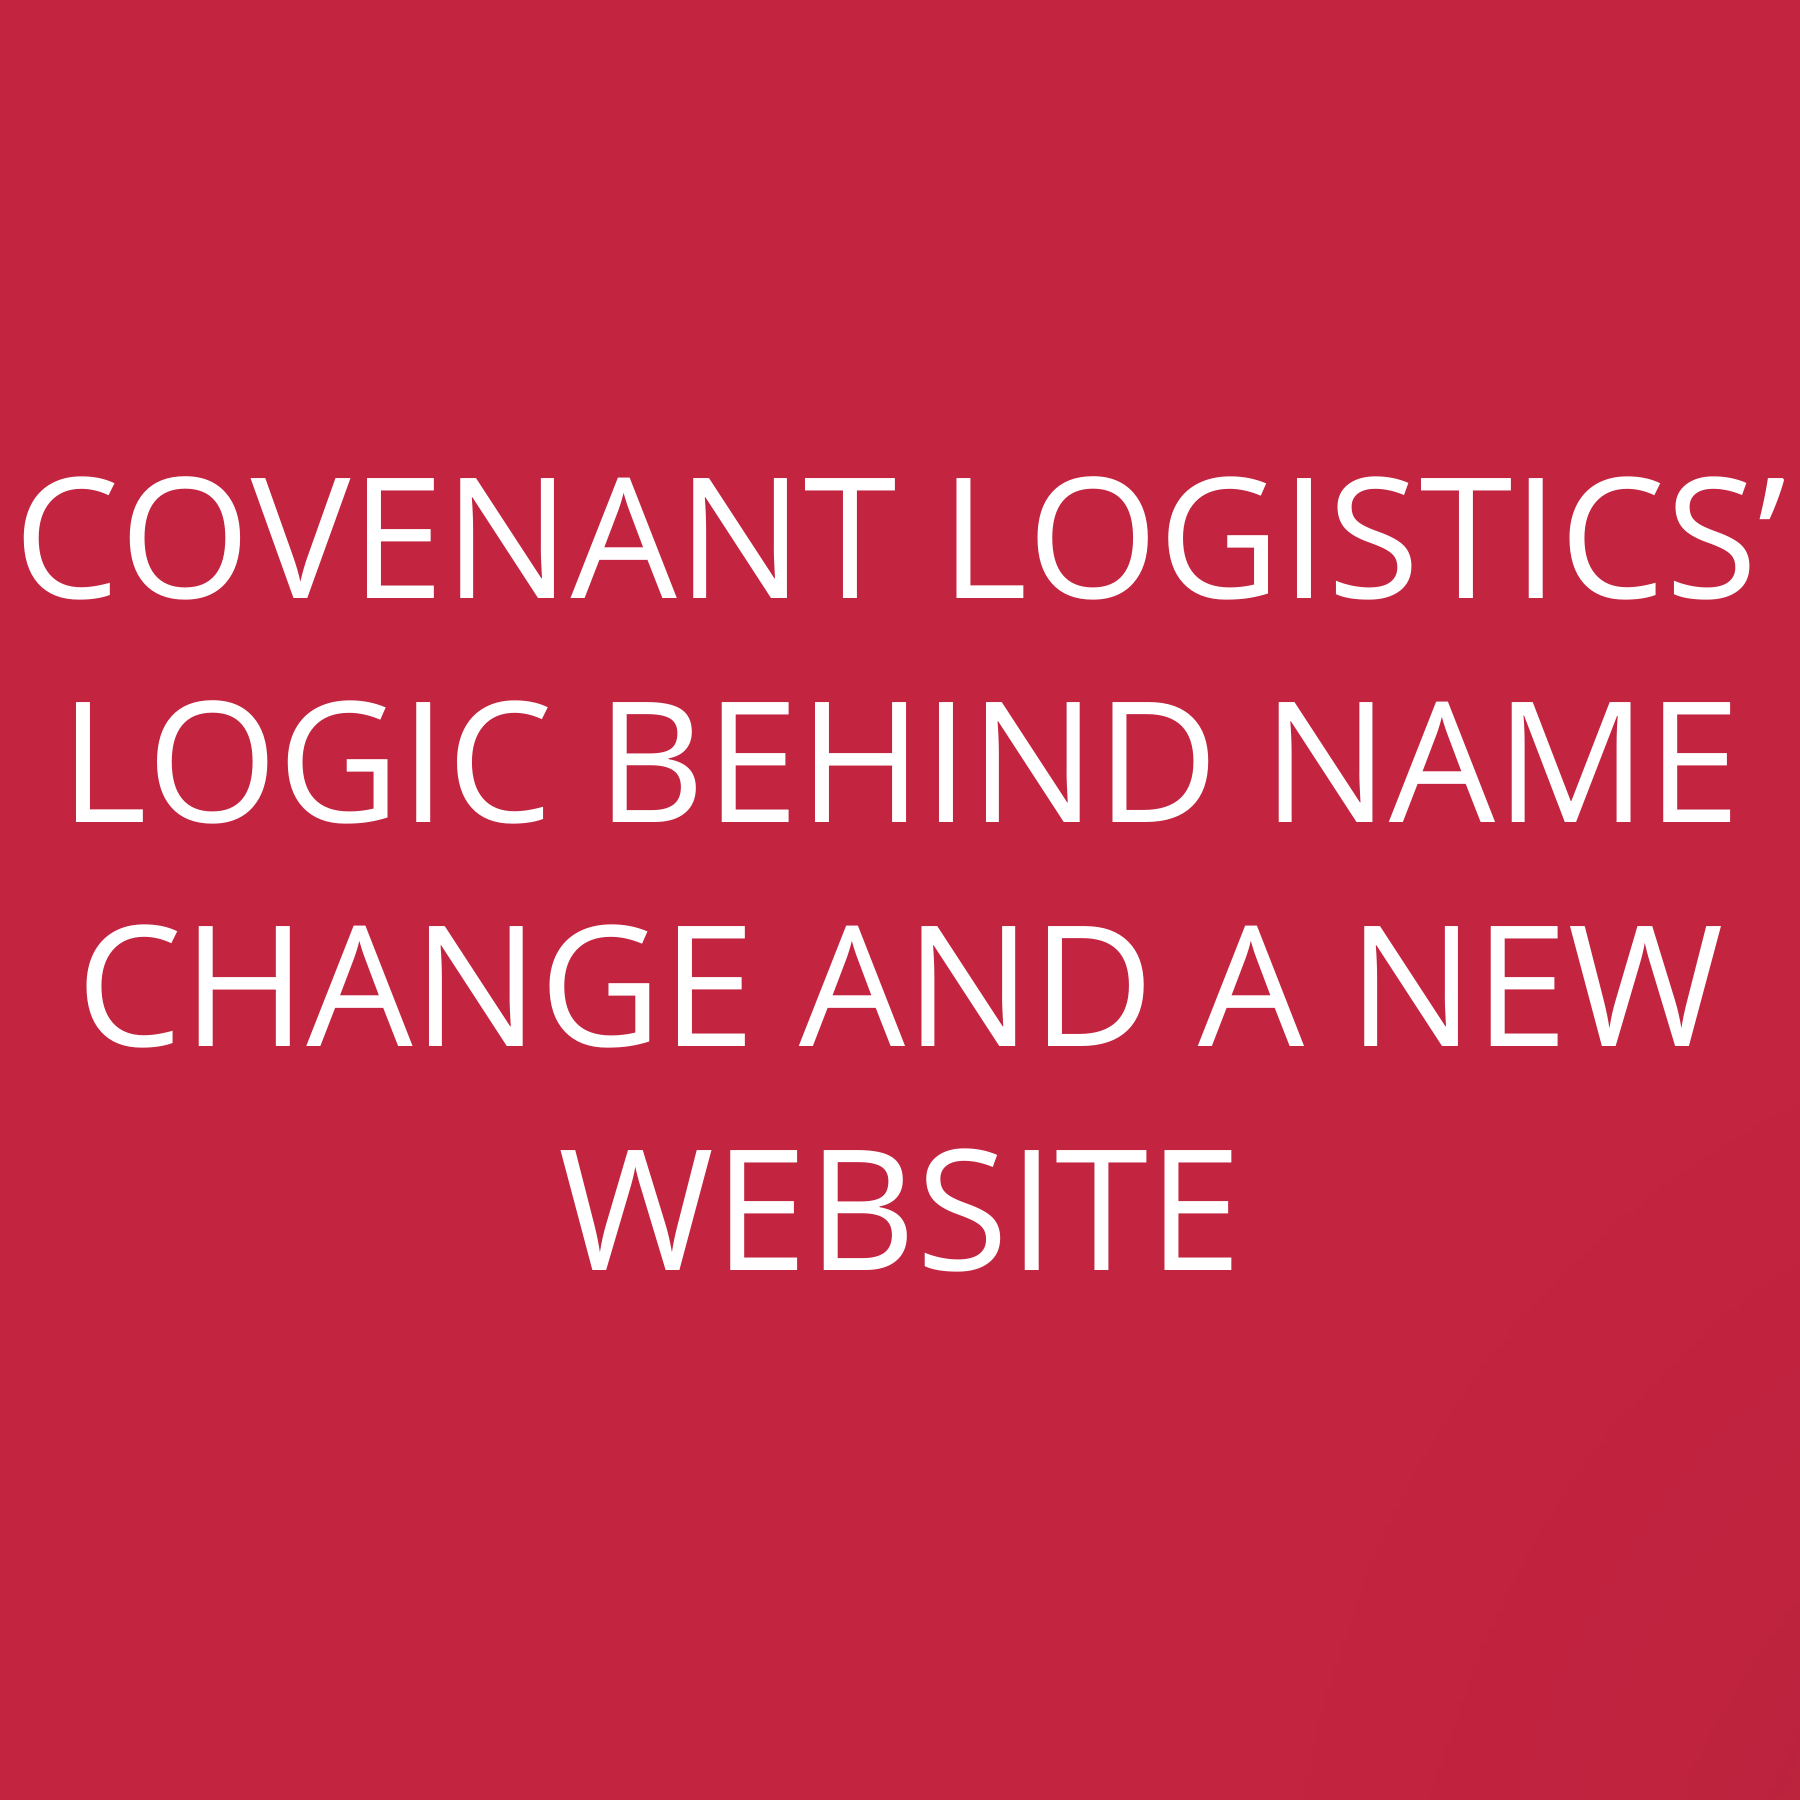 Covenant Logistics’ logic behind name change AND a new website